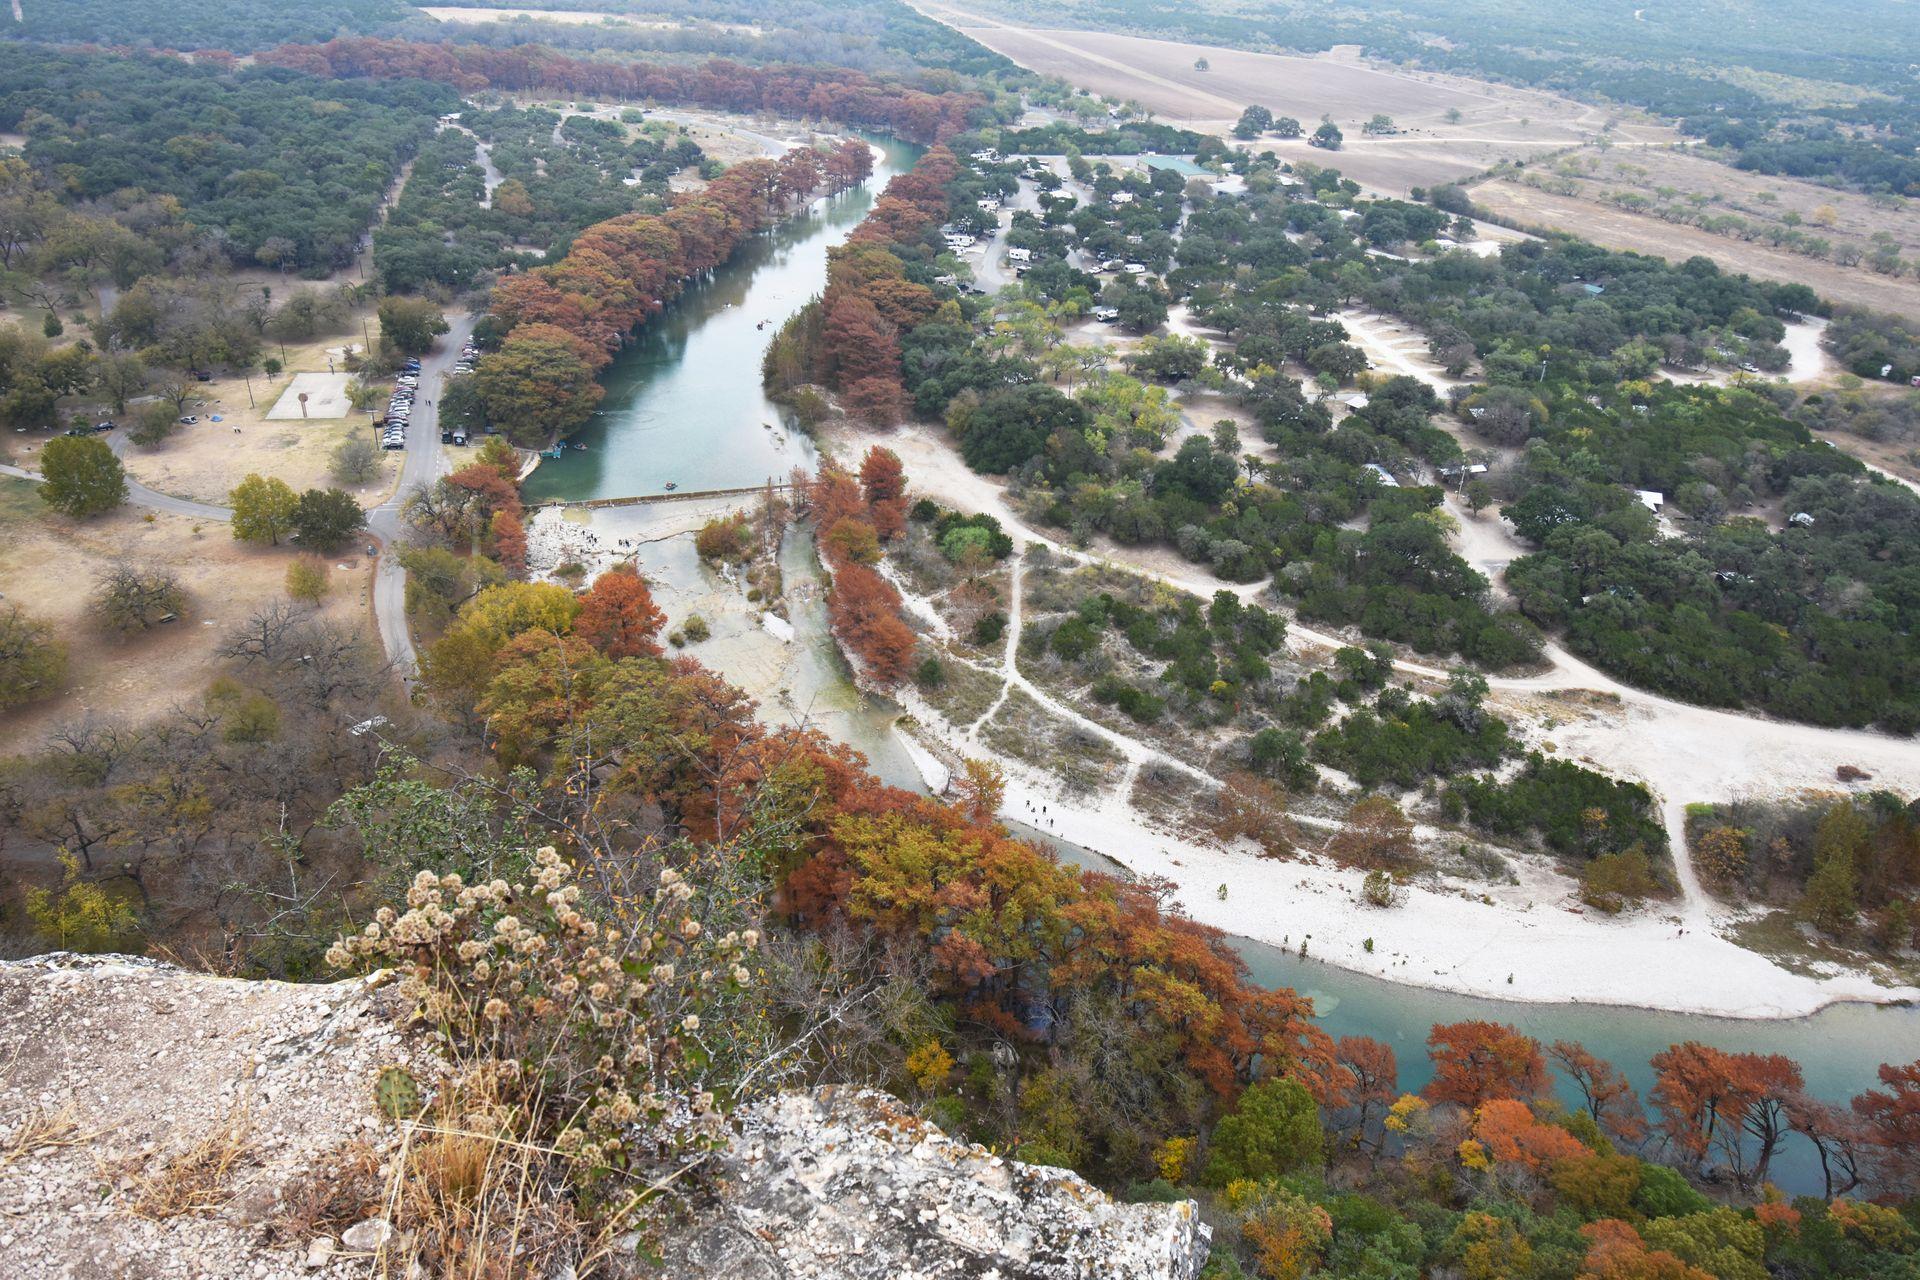 A view looking down at the Frio River in Garner State Park